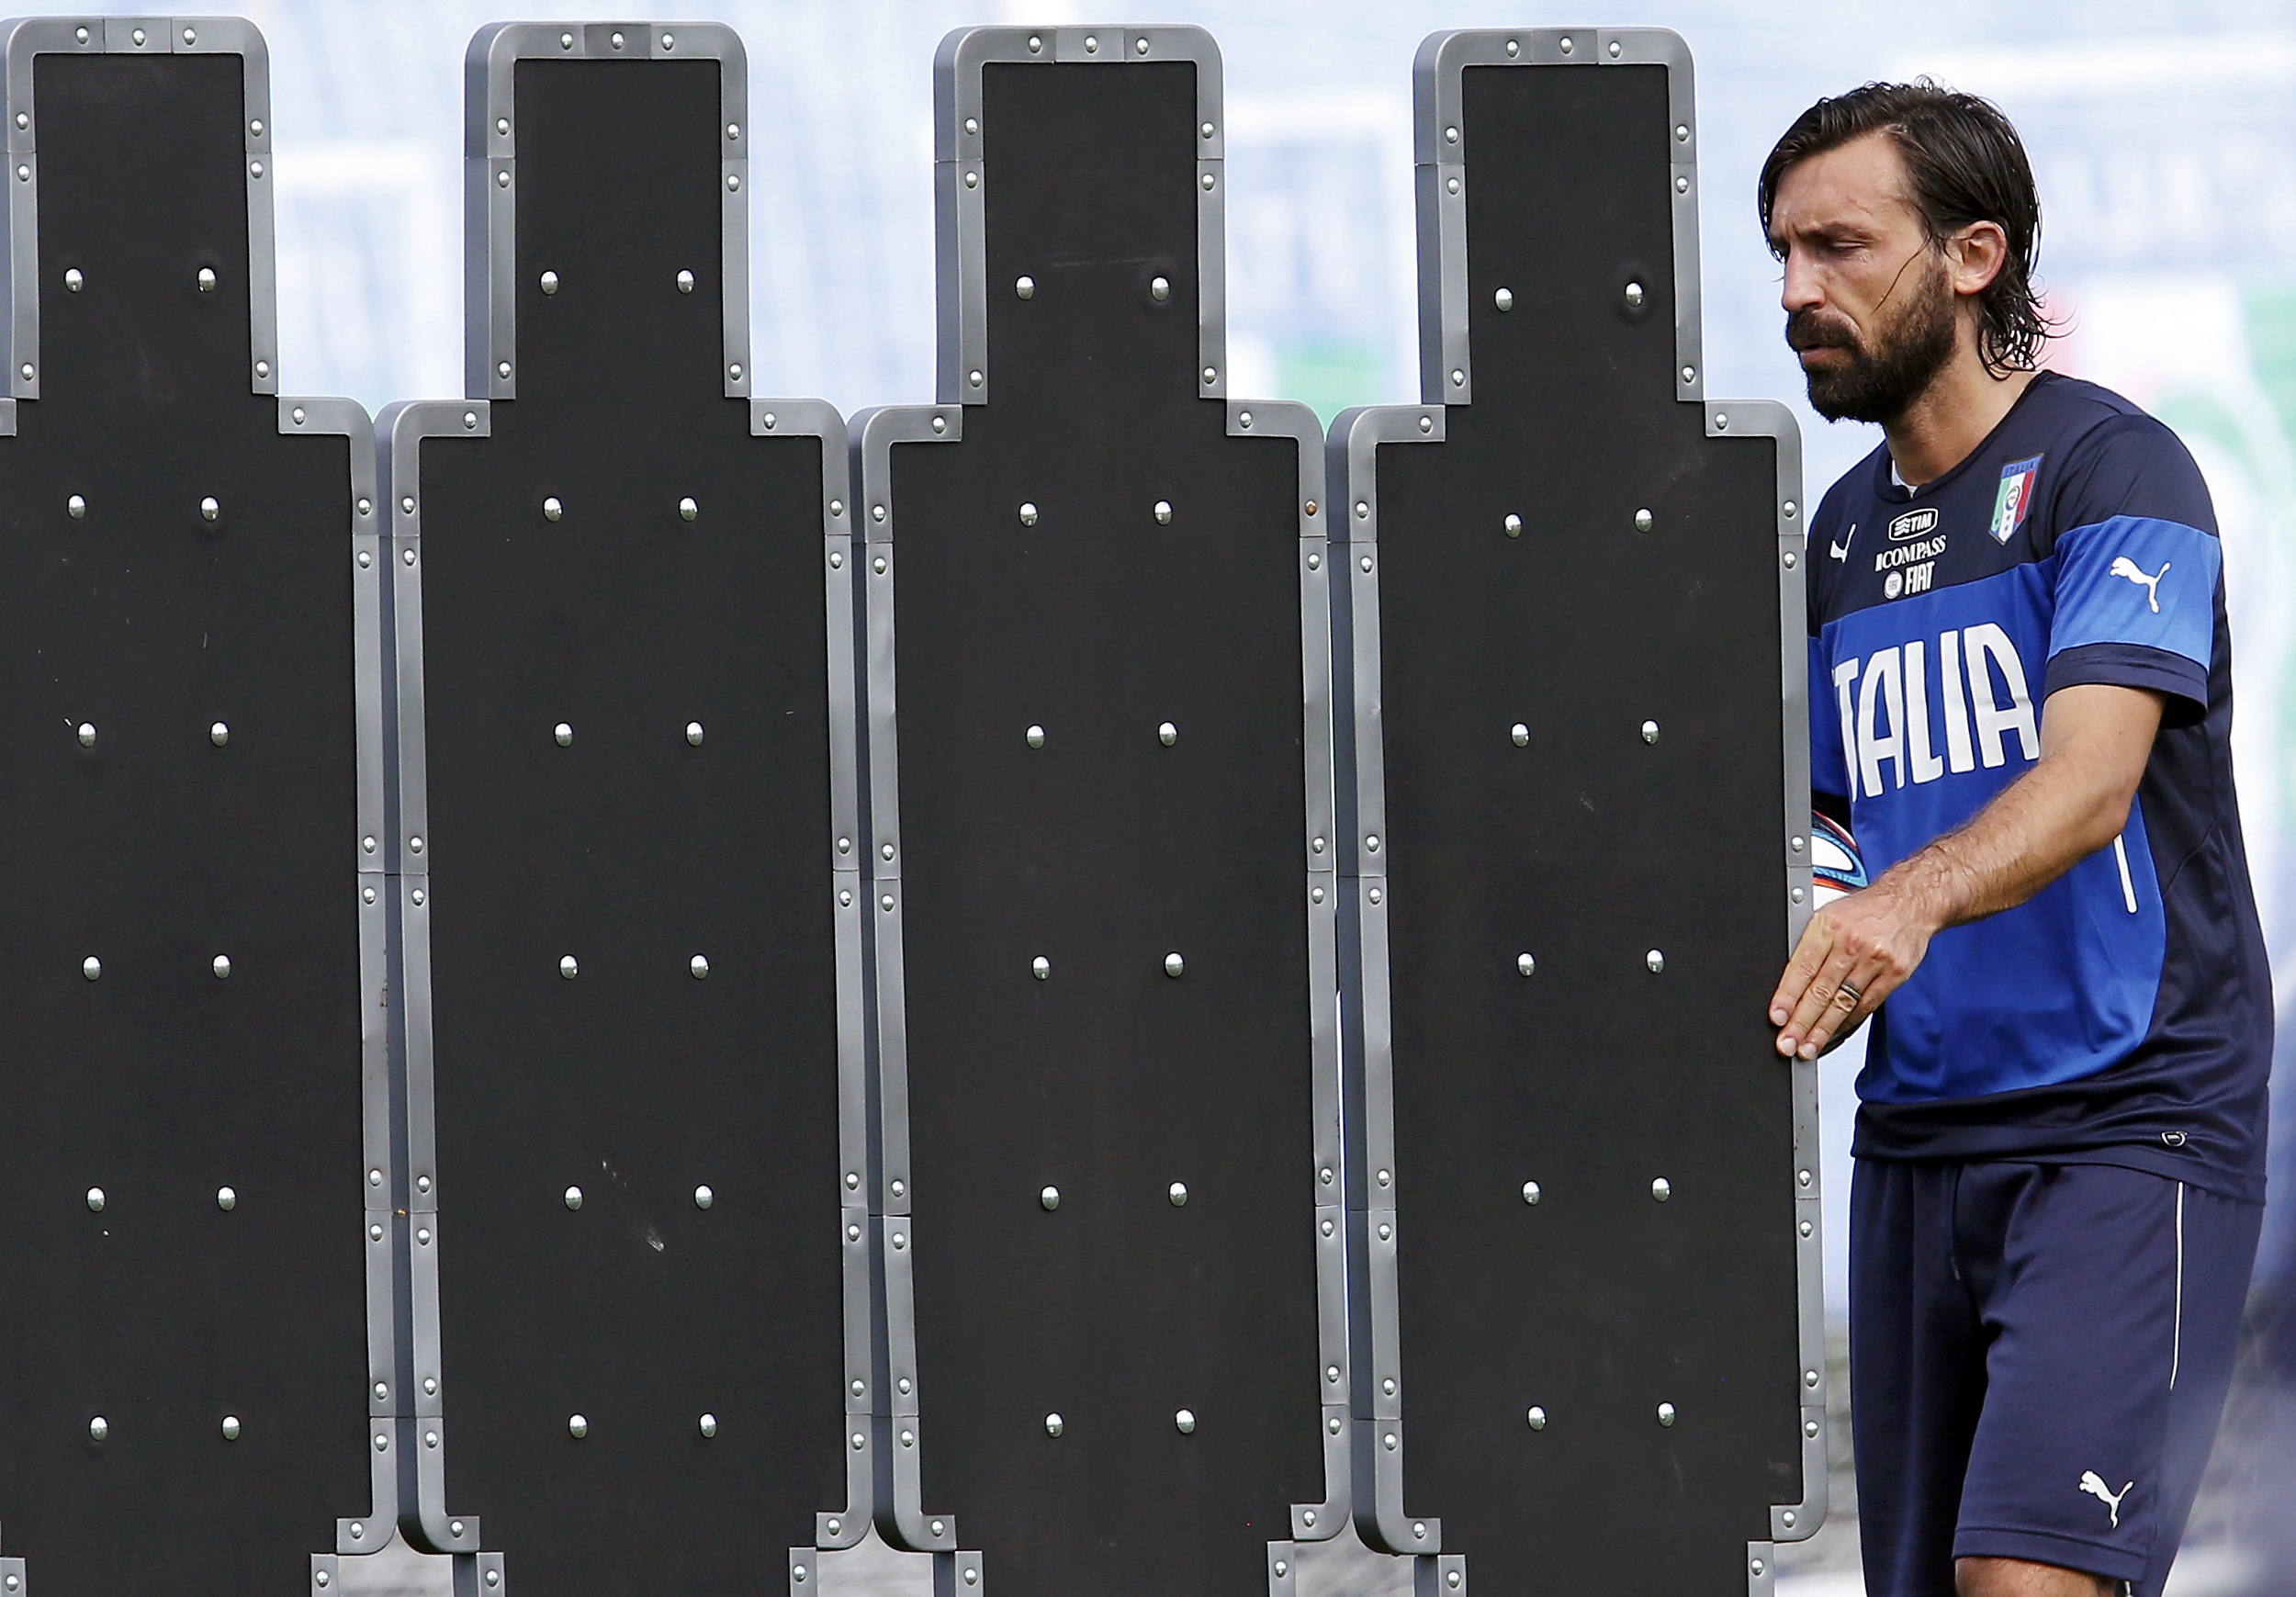 Italy's national soccer player Andrea Pirlo moves the barrier for the free kicks during a training session ahead of the 2014 World Cup at the Portobello training center in Mangaratiba June 11, 2014.  REUTERS/Alessandro Garofalo (BRAZIL  - Tags: SPORT SOCC